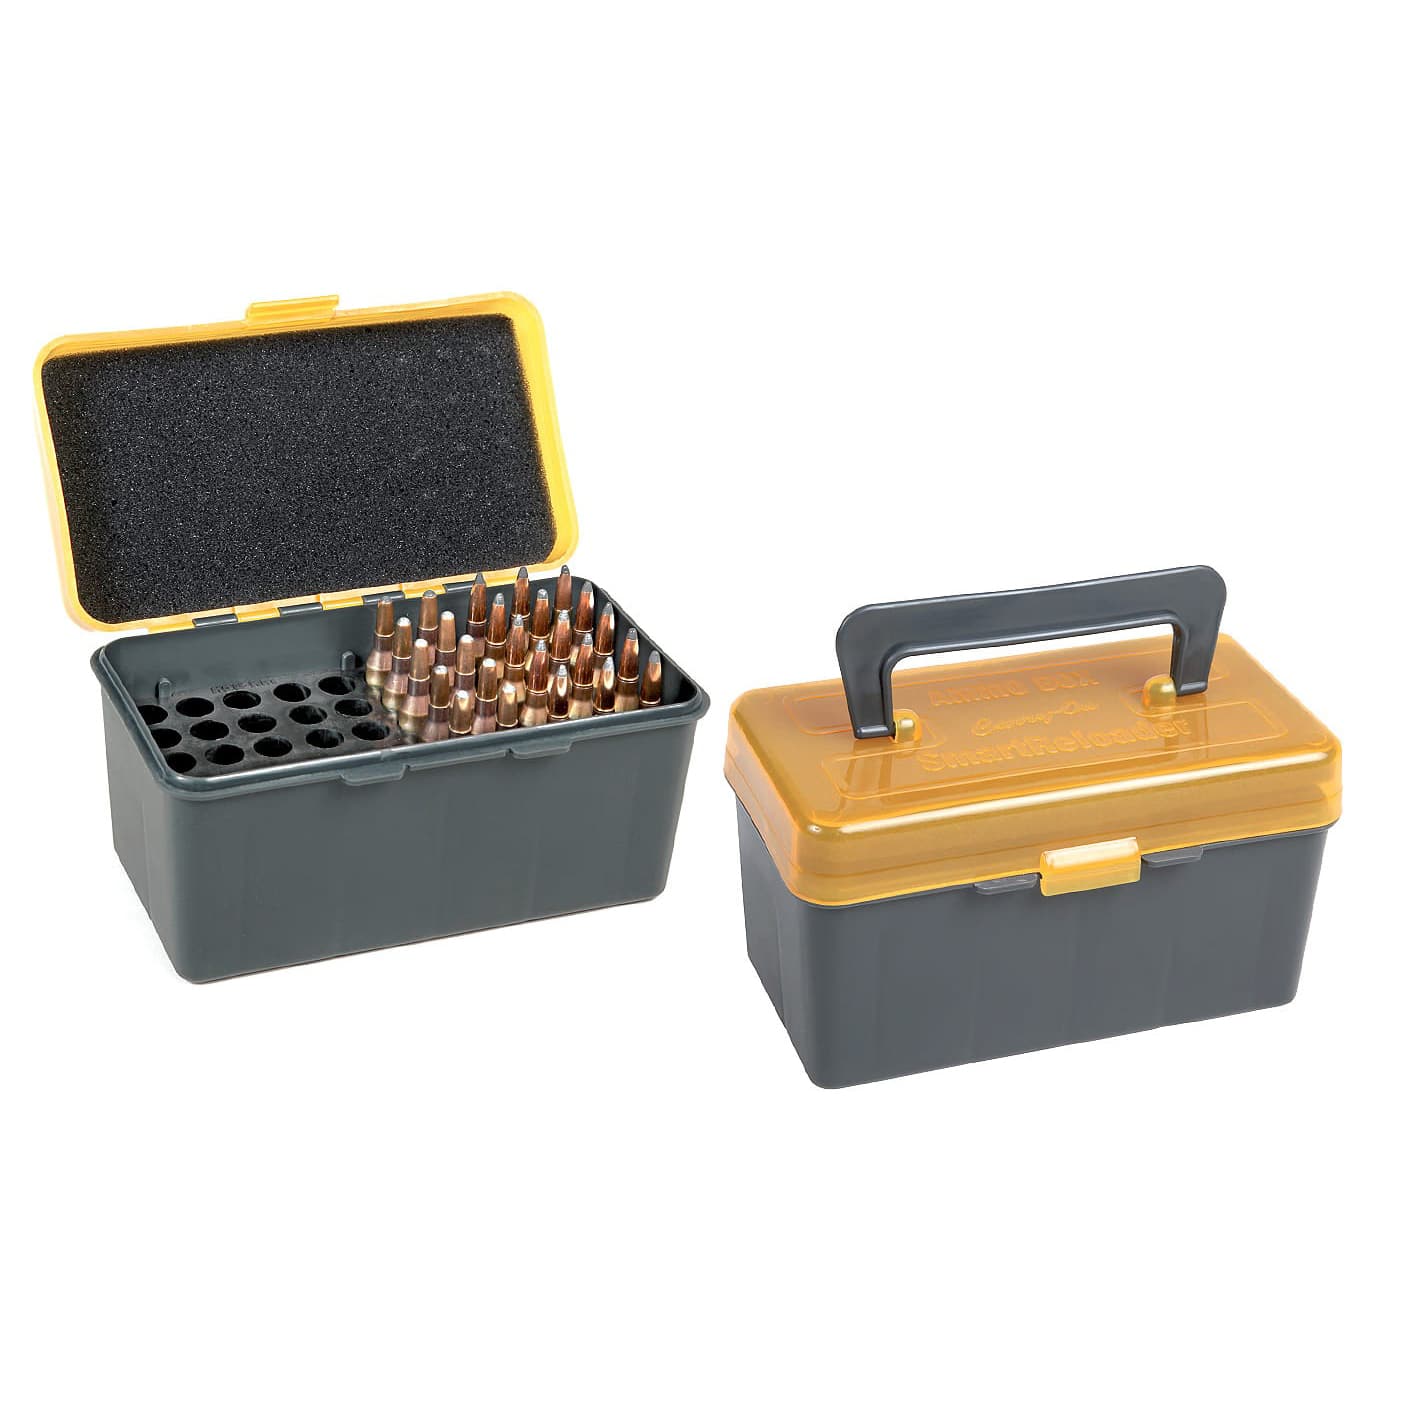 Smart Reloader: Ammo Box Carry-On Large .30-06 Springfield